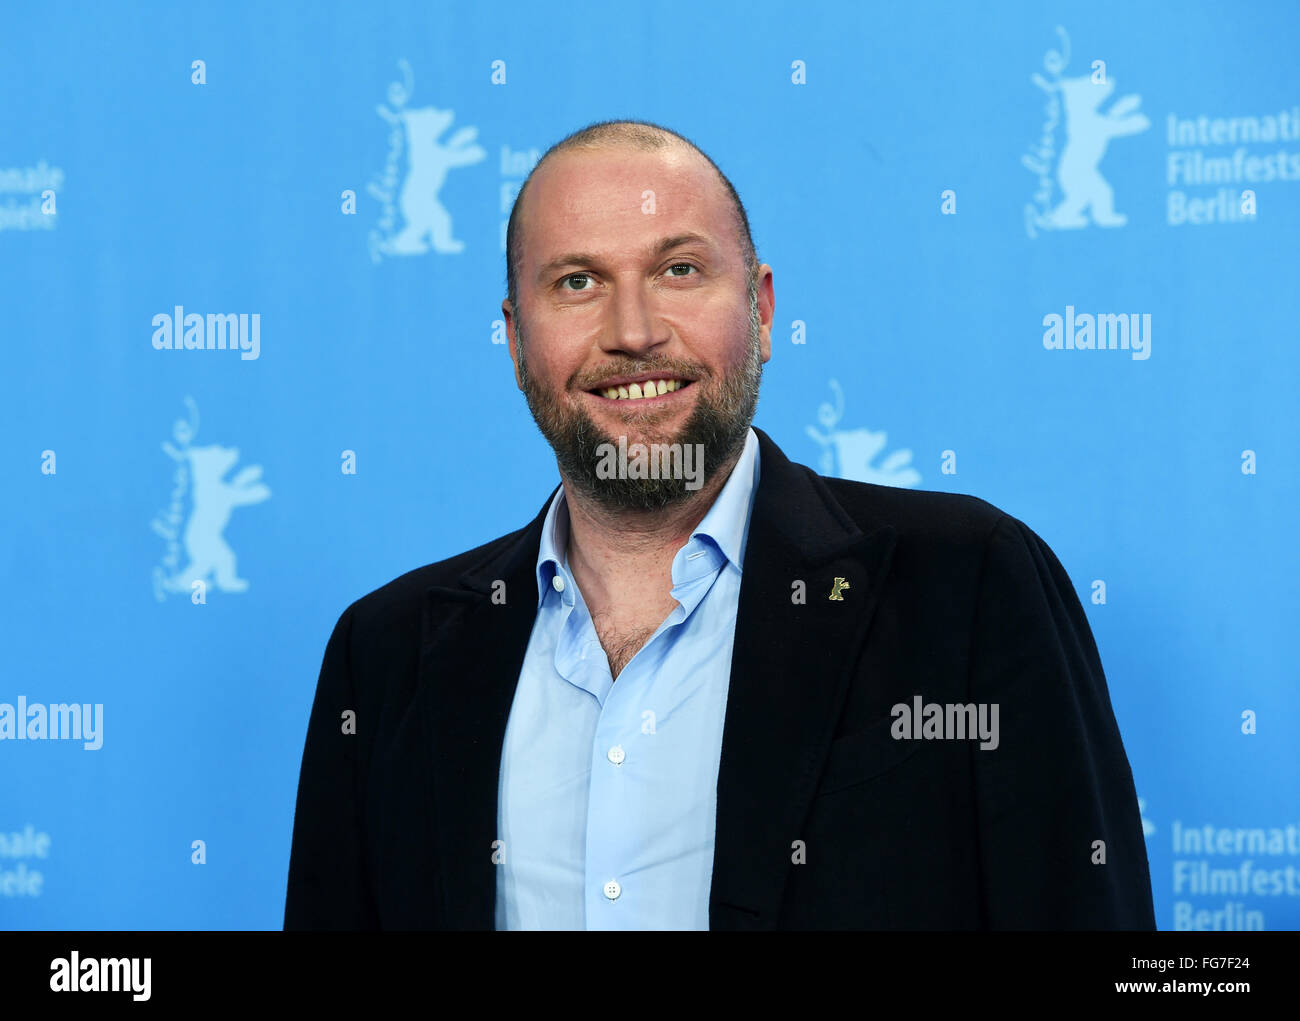 Berlin, Germany. 11th Feb, 2016. 66th International Film Festival in Berlin, Germany, 11 February 2016. Photo call 'Des nouvelles de la planete Mars' ('News from planet Mars'): Actor Francois Damiens. The film runs in Berlinale section Competition (not in competition). The Berlinale runs from 11 February to 21 February 2016. Photo: Jens Kalaene/dpa/Alamy Live News Stock Photo